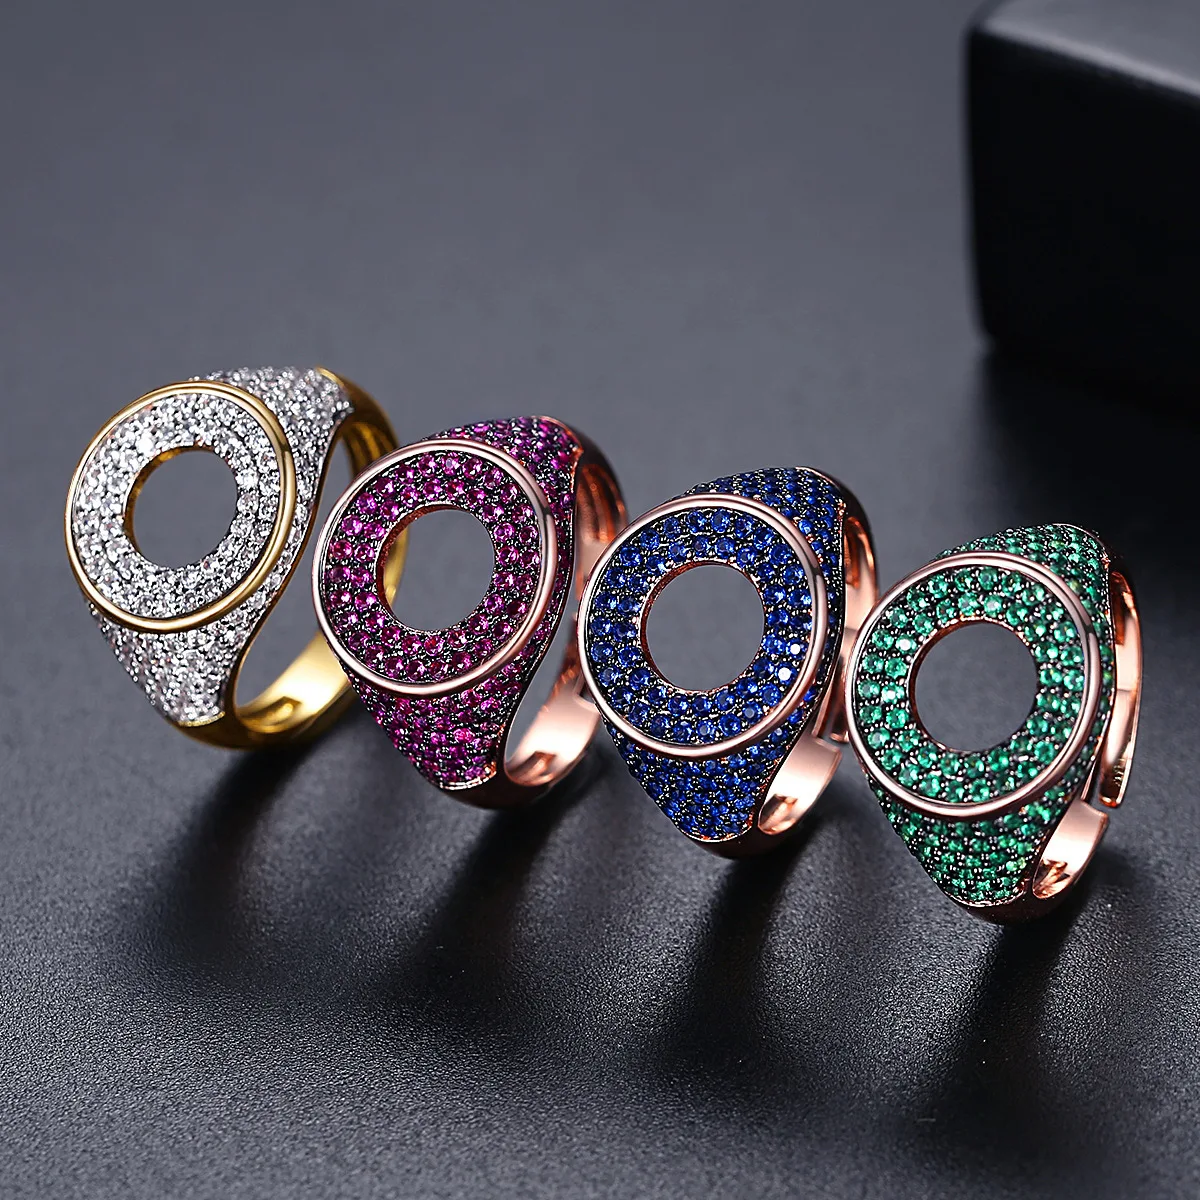 New In Gift Men Tail Ring For Women Colored Spinel Zircon Unisex Accessories Jewelry Punk Best Sellers Products Free Shipping